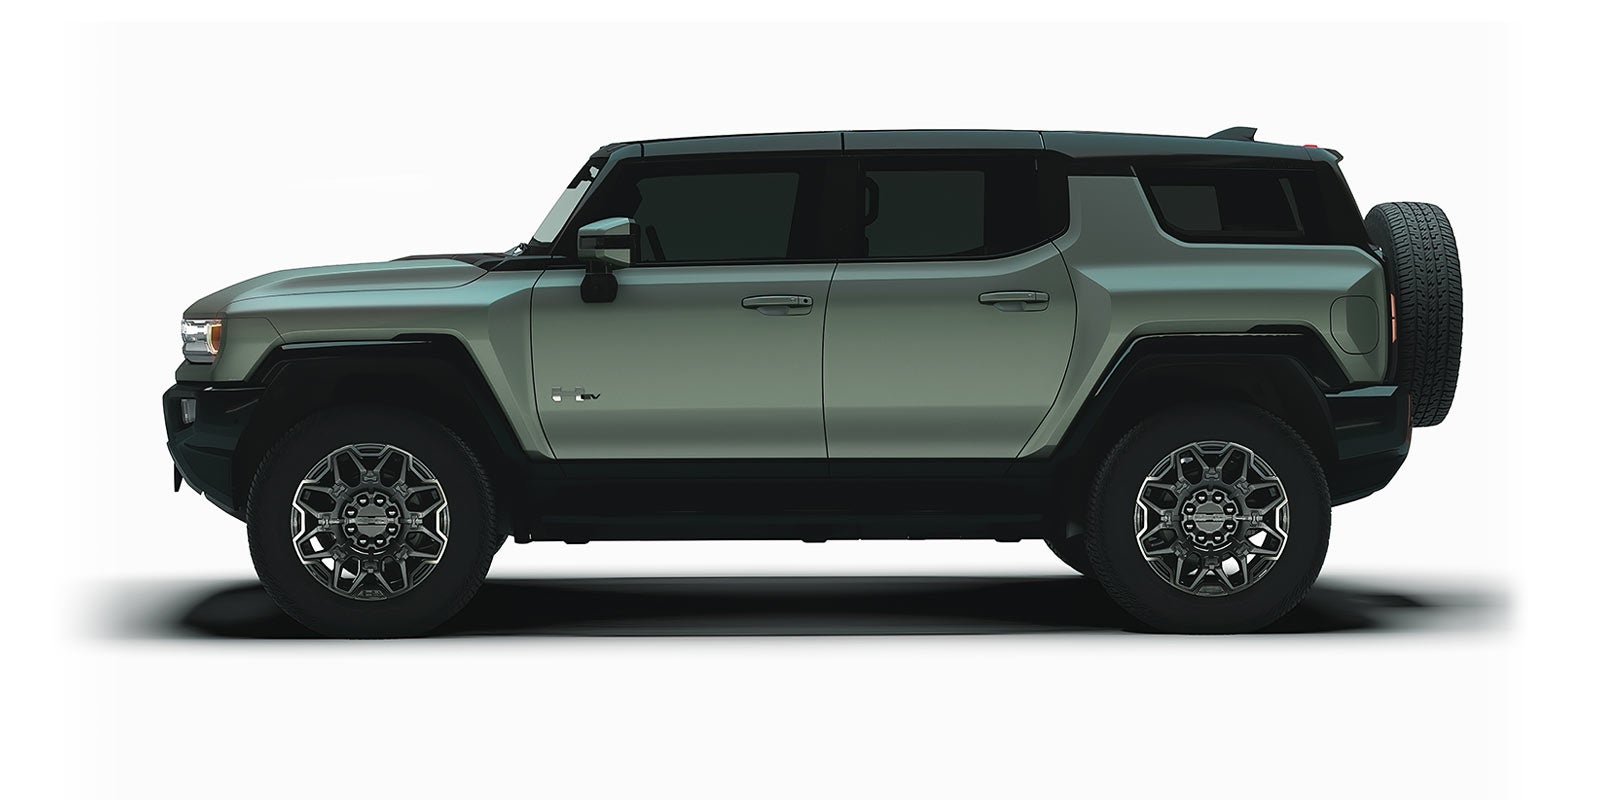 hummer ev pickup and hummer ev | Ed Martin Buick-GMC of Anderson in ANDERSON IN